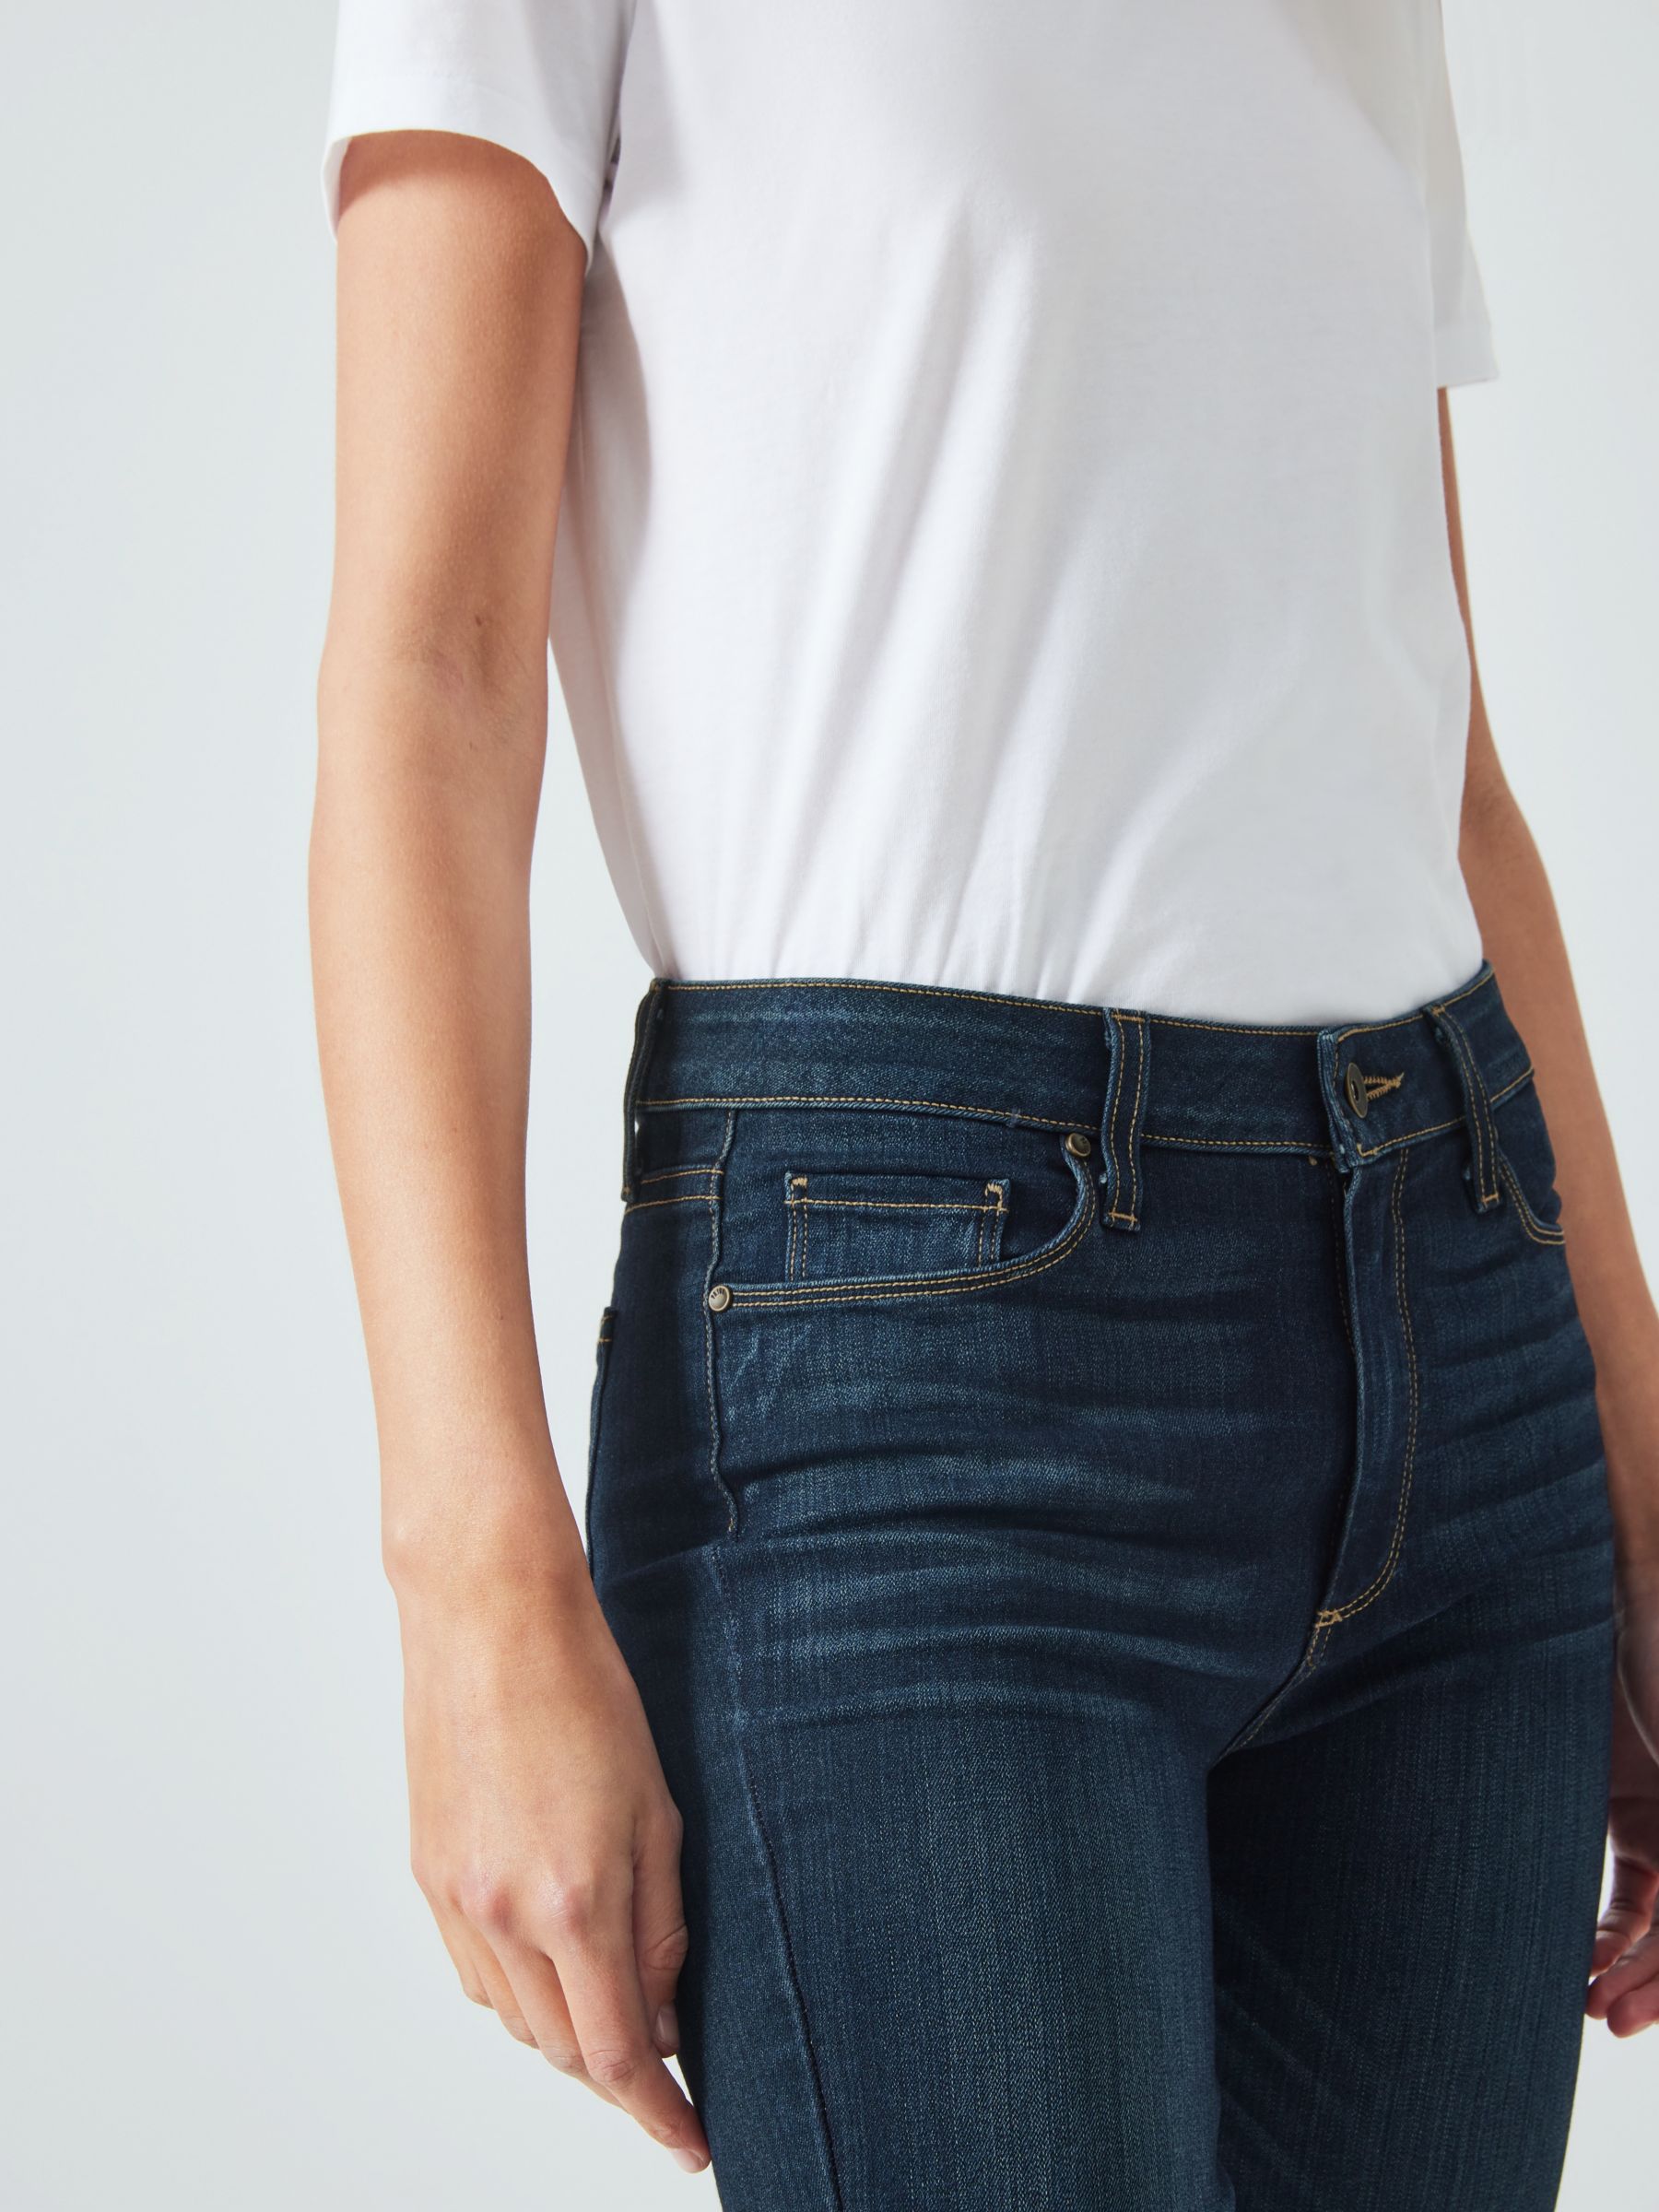 PAIGE The Hoxton Skinny Ankle Jeans, Blue at John Lewis & Partners